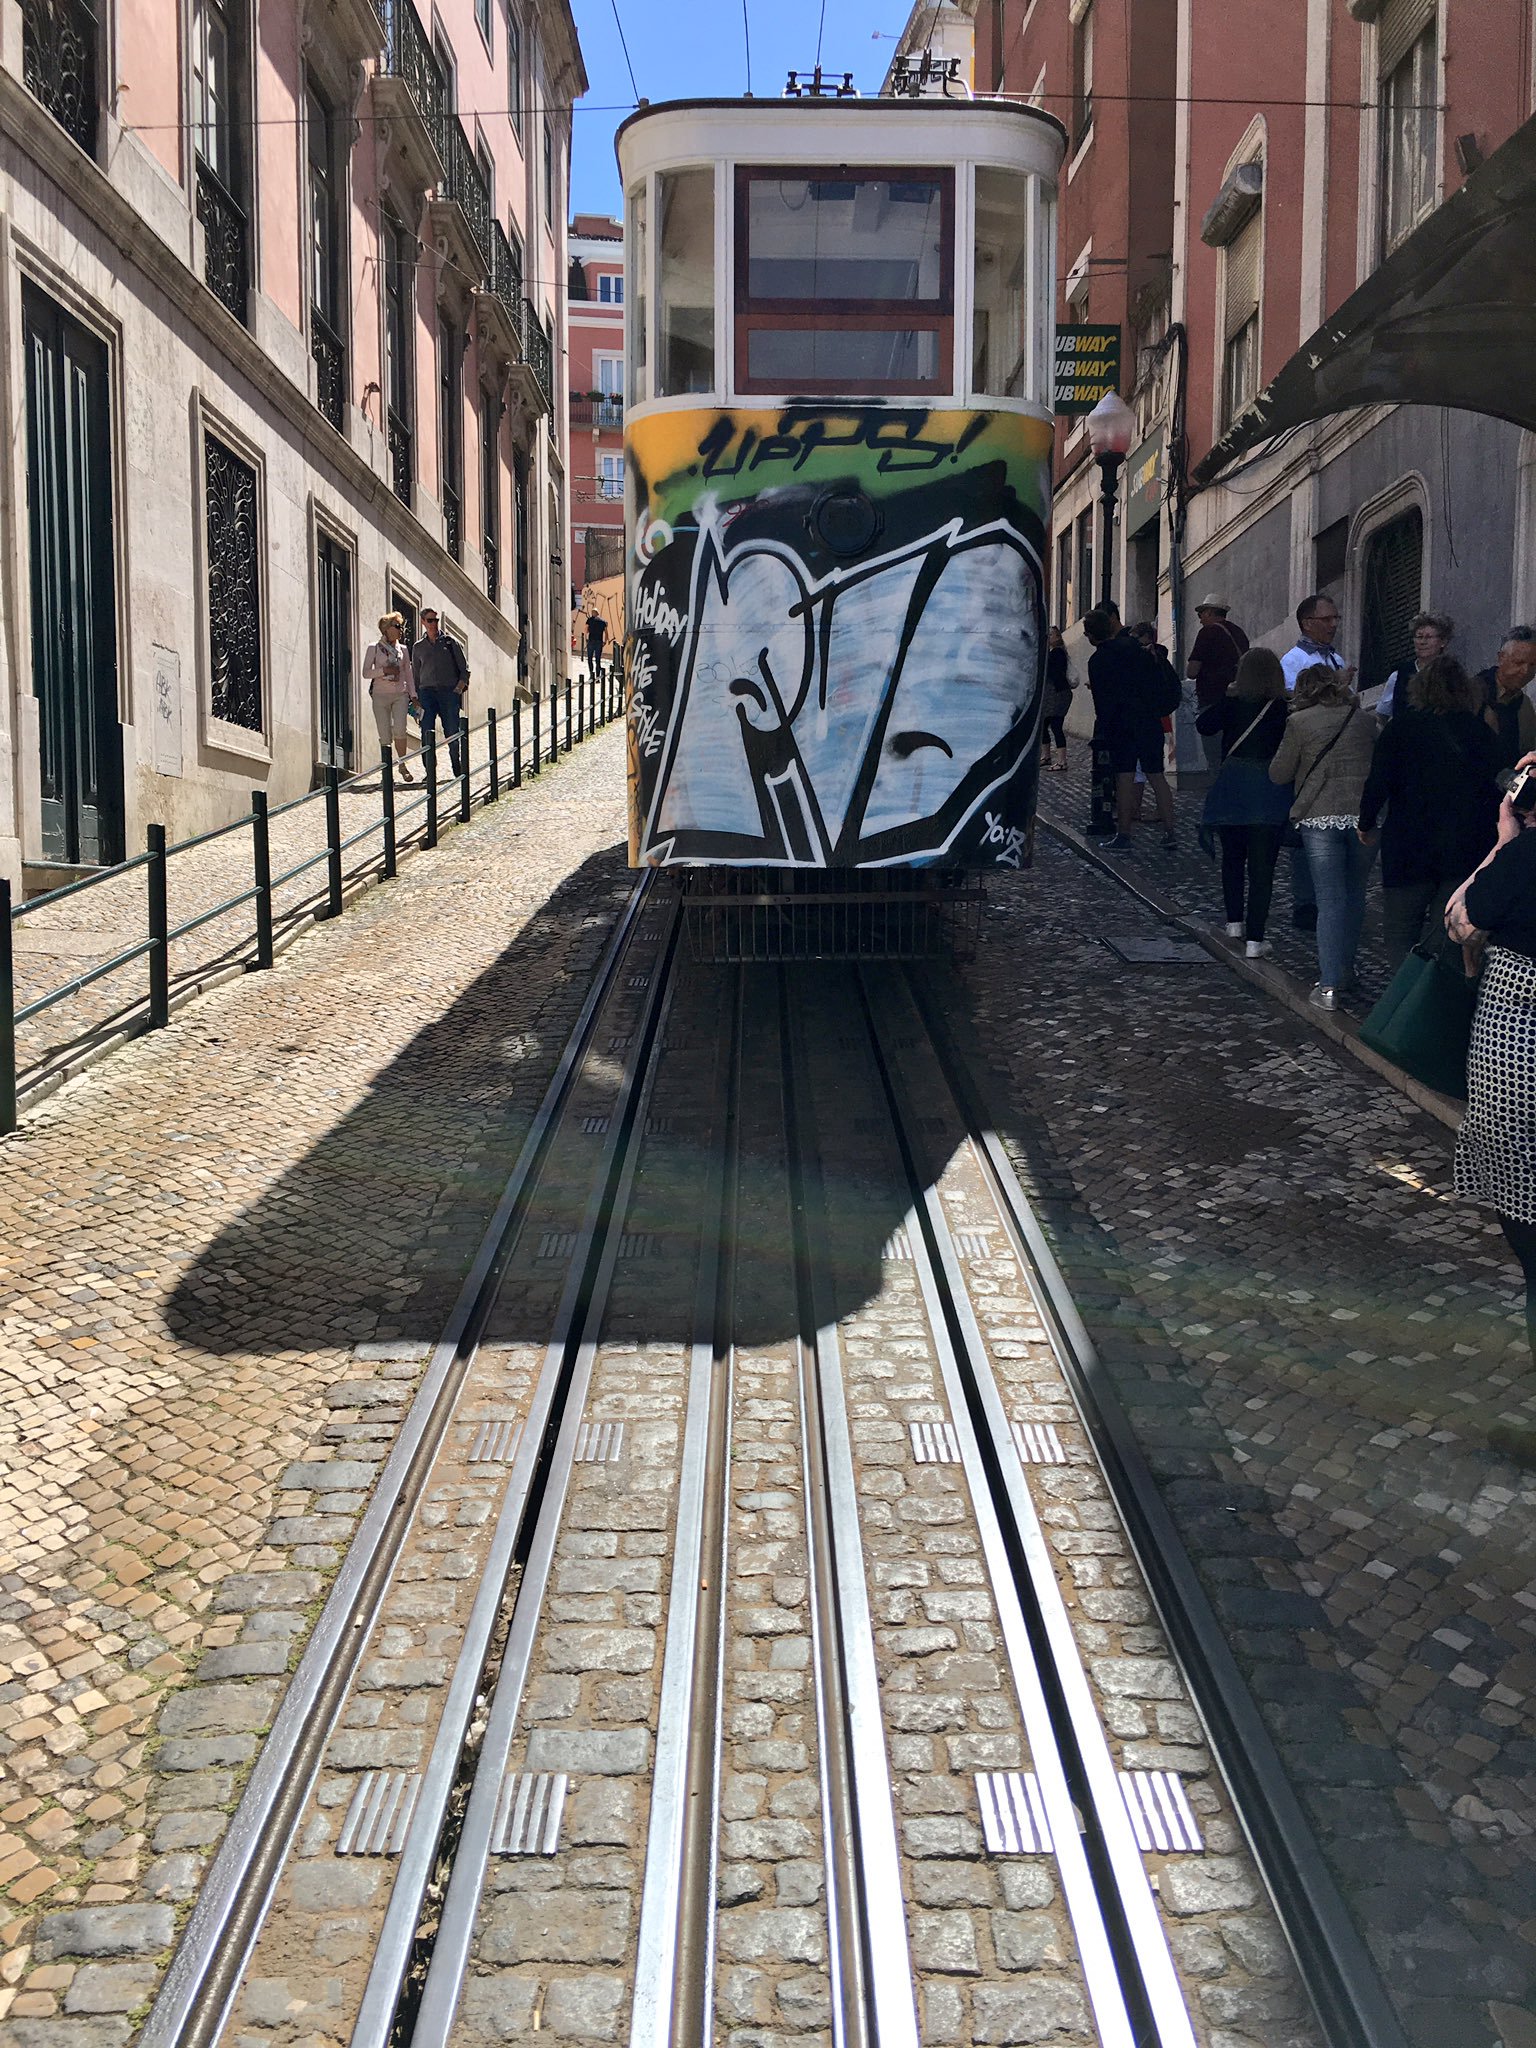 Don't have room for two parallel funicular tracks with cable? Overlap them. https://t.co/lO5WVTMqo4